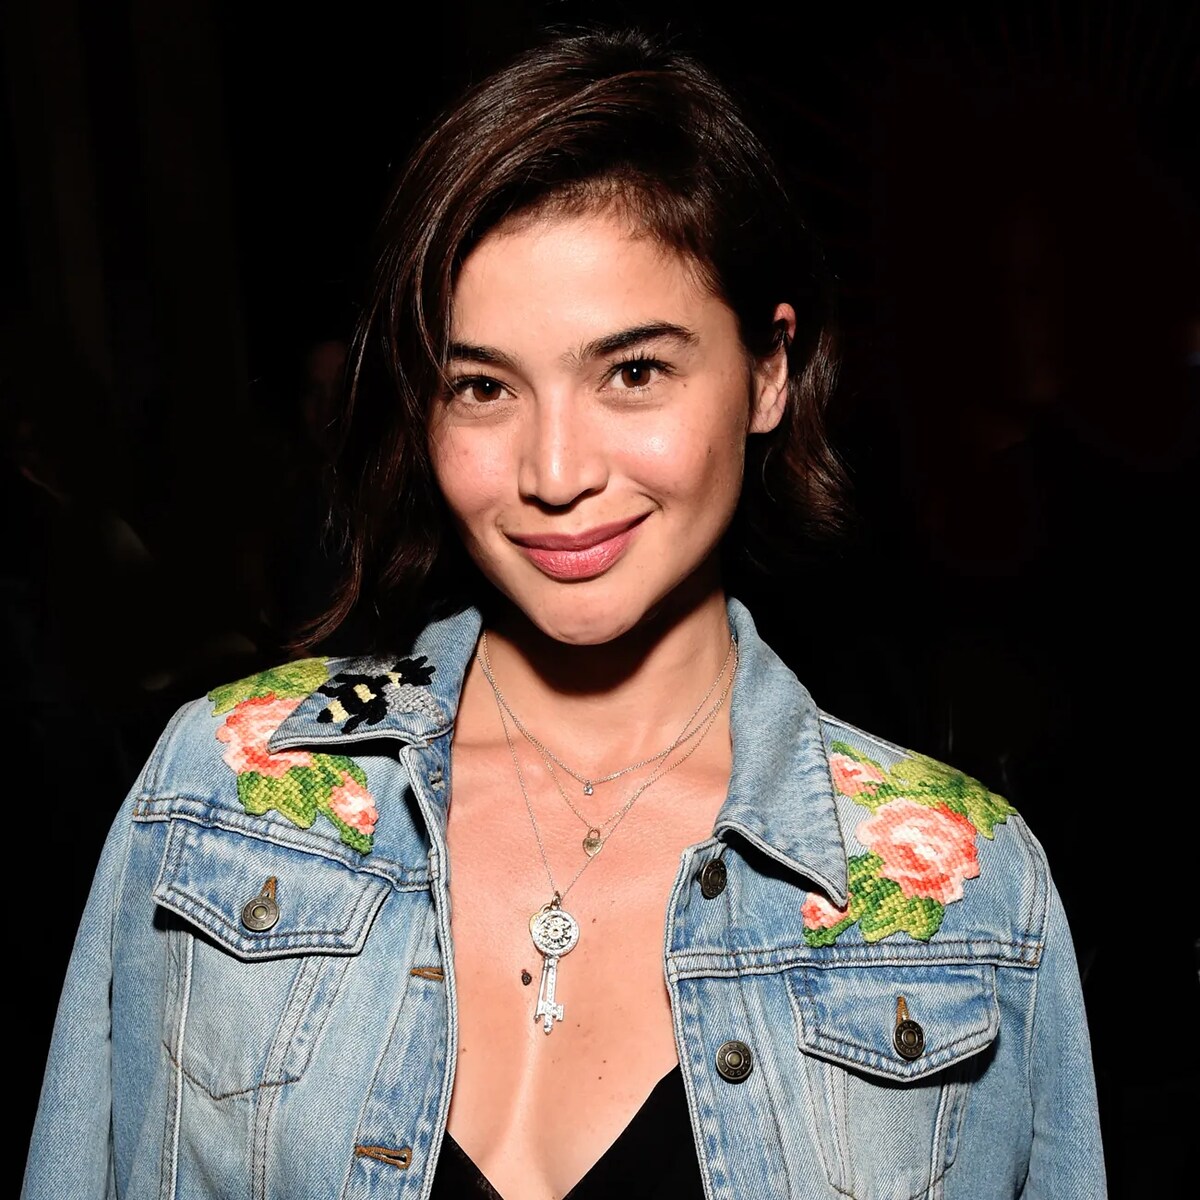 24 Astounding Facts About Anne Curtis - Facts.net